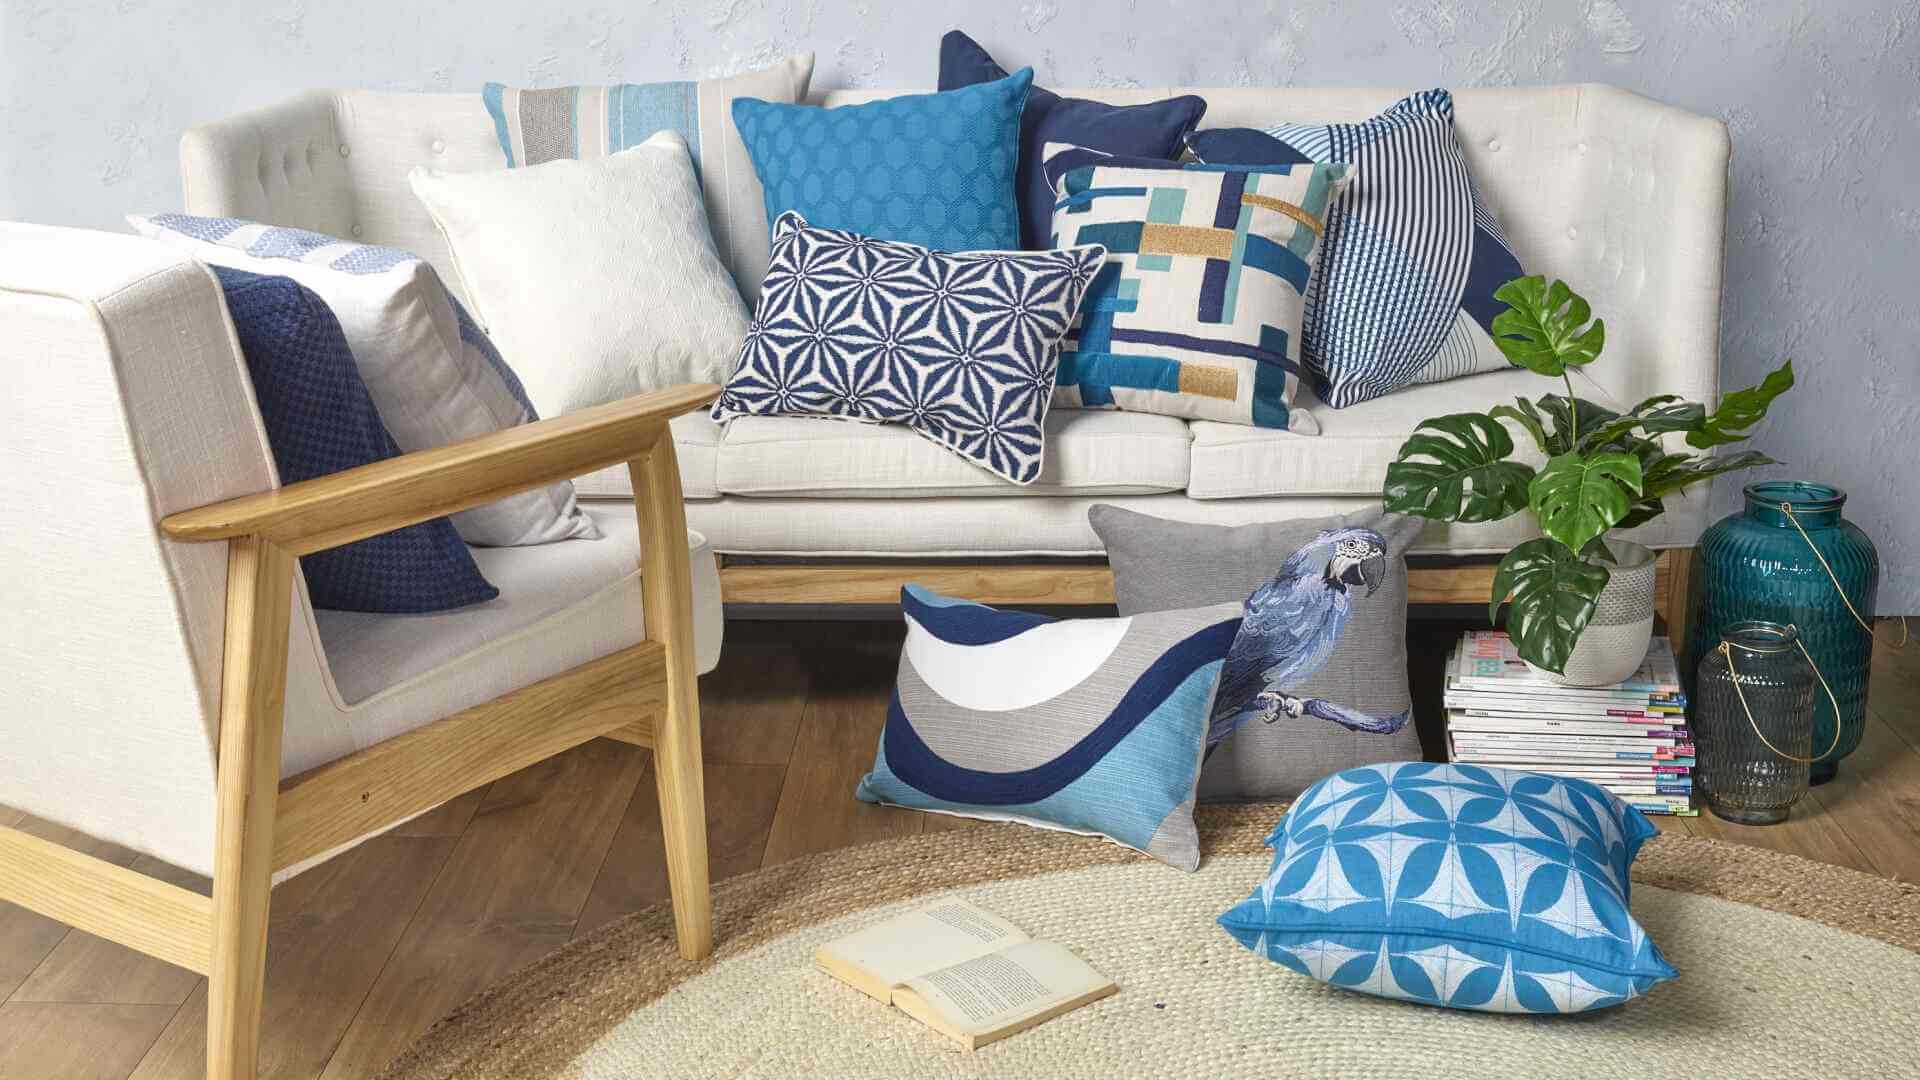 How To Choose & Style Cushions For Your Home